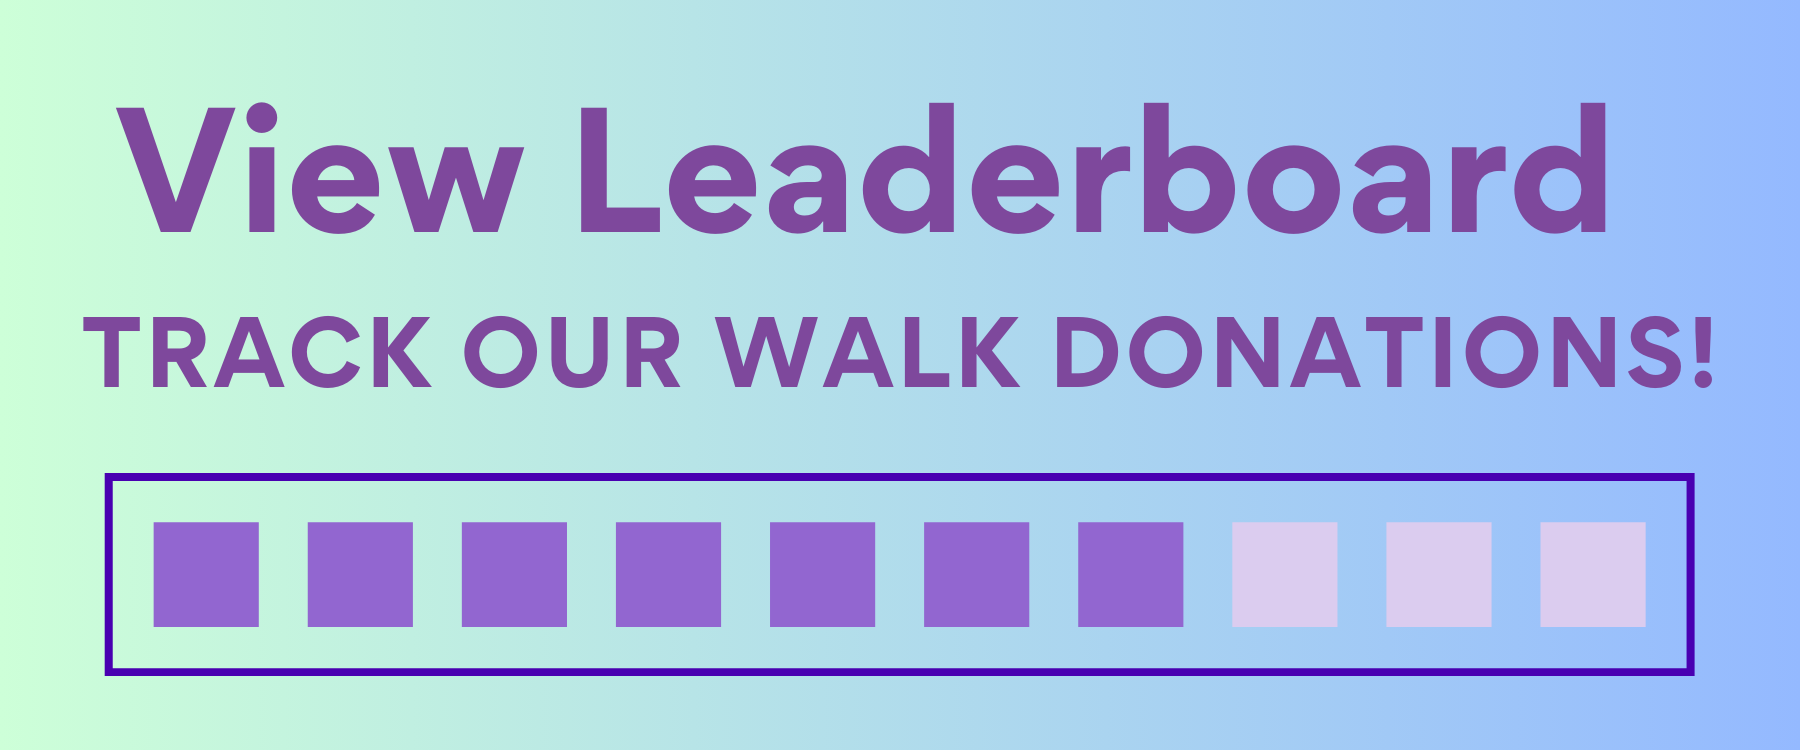 Image of text that says "view leaderboard - track our walk donations!"